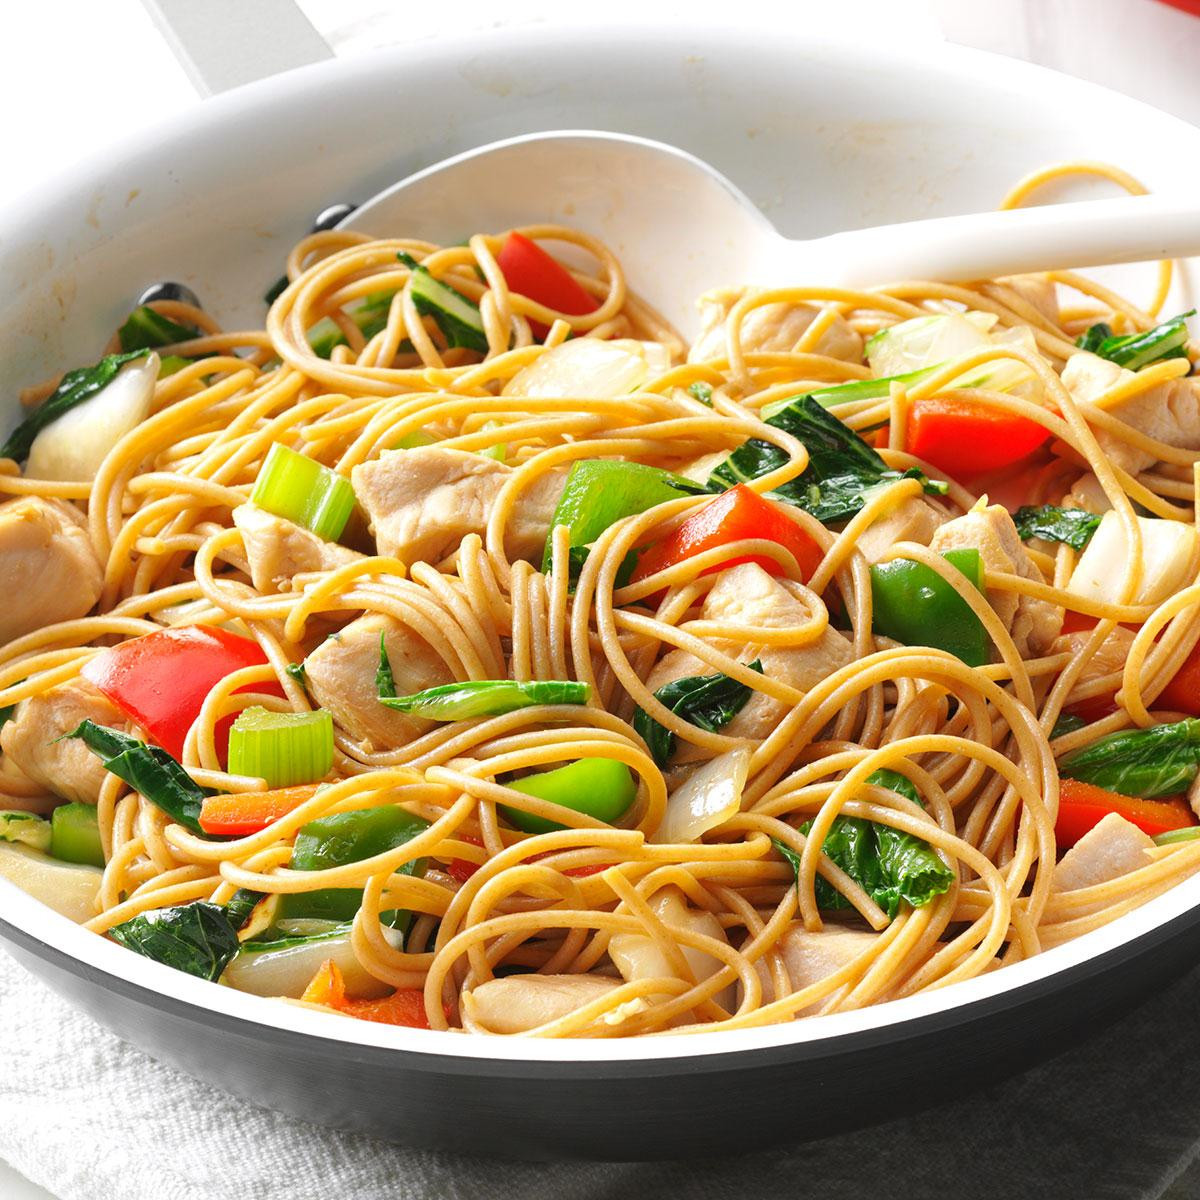 Chinese Noodles Recipe With Chicken
 Chicken Stir Fry with Noodles Recipe